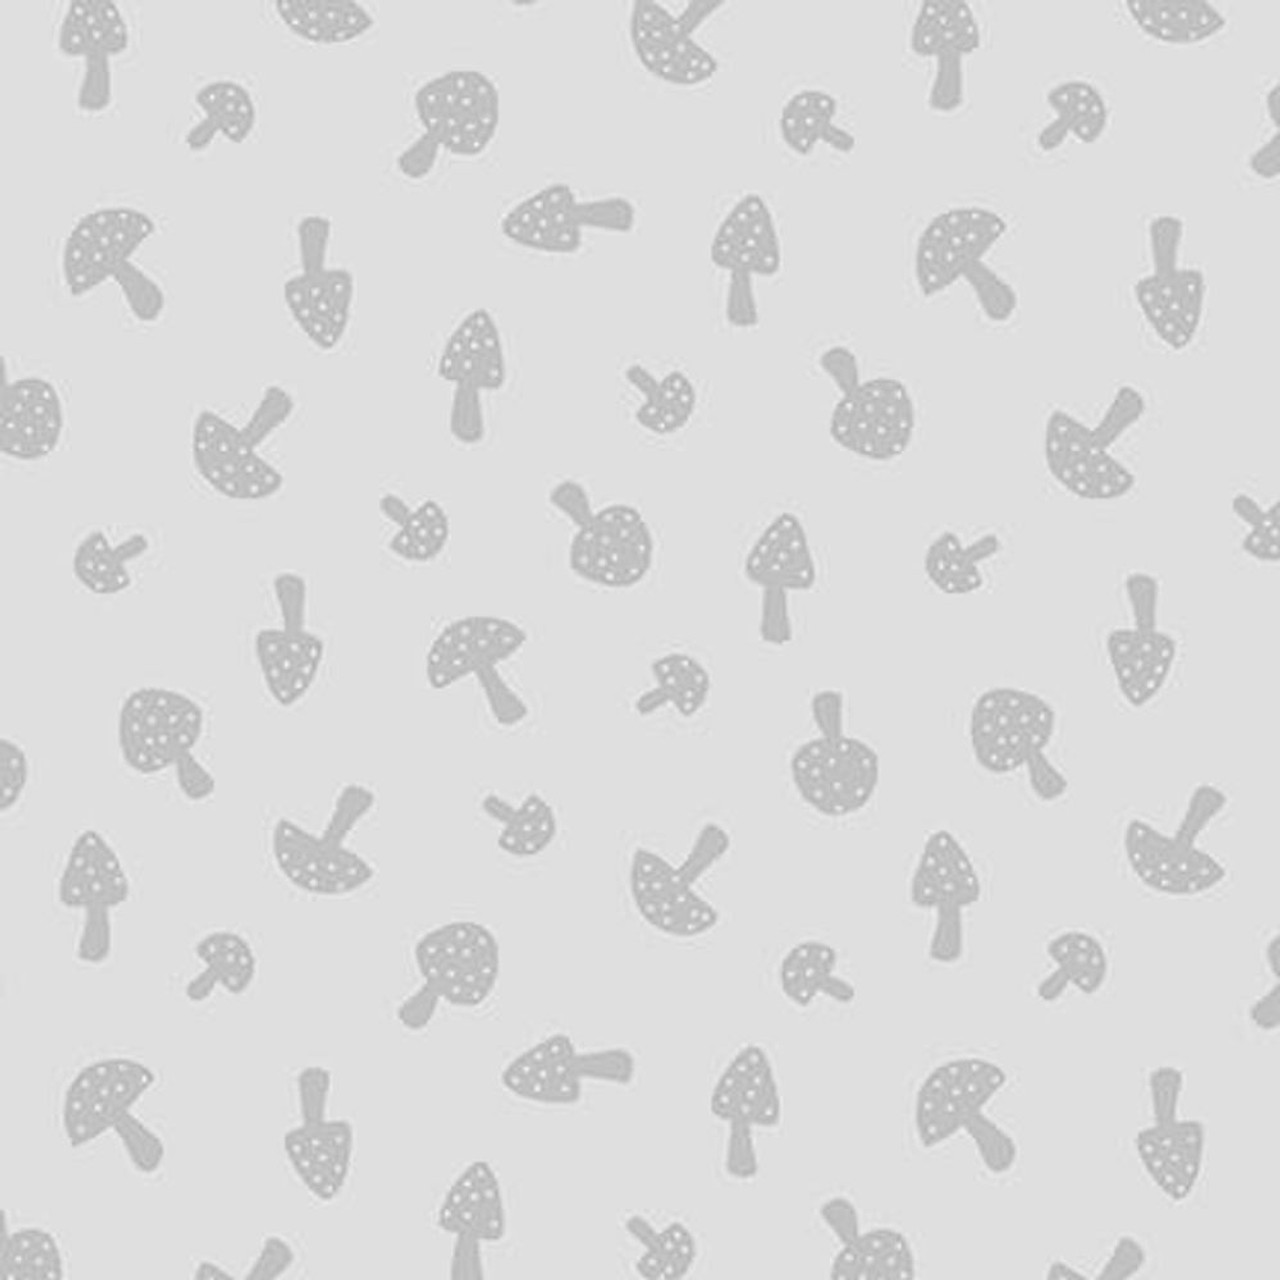 Blank Quilting Gray Scale Mushrooms Gray Cotton Fabric By The Yard